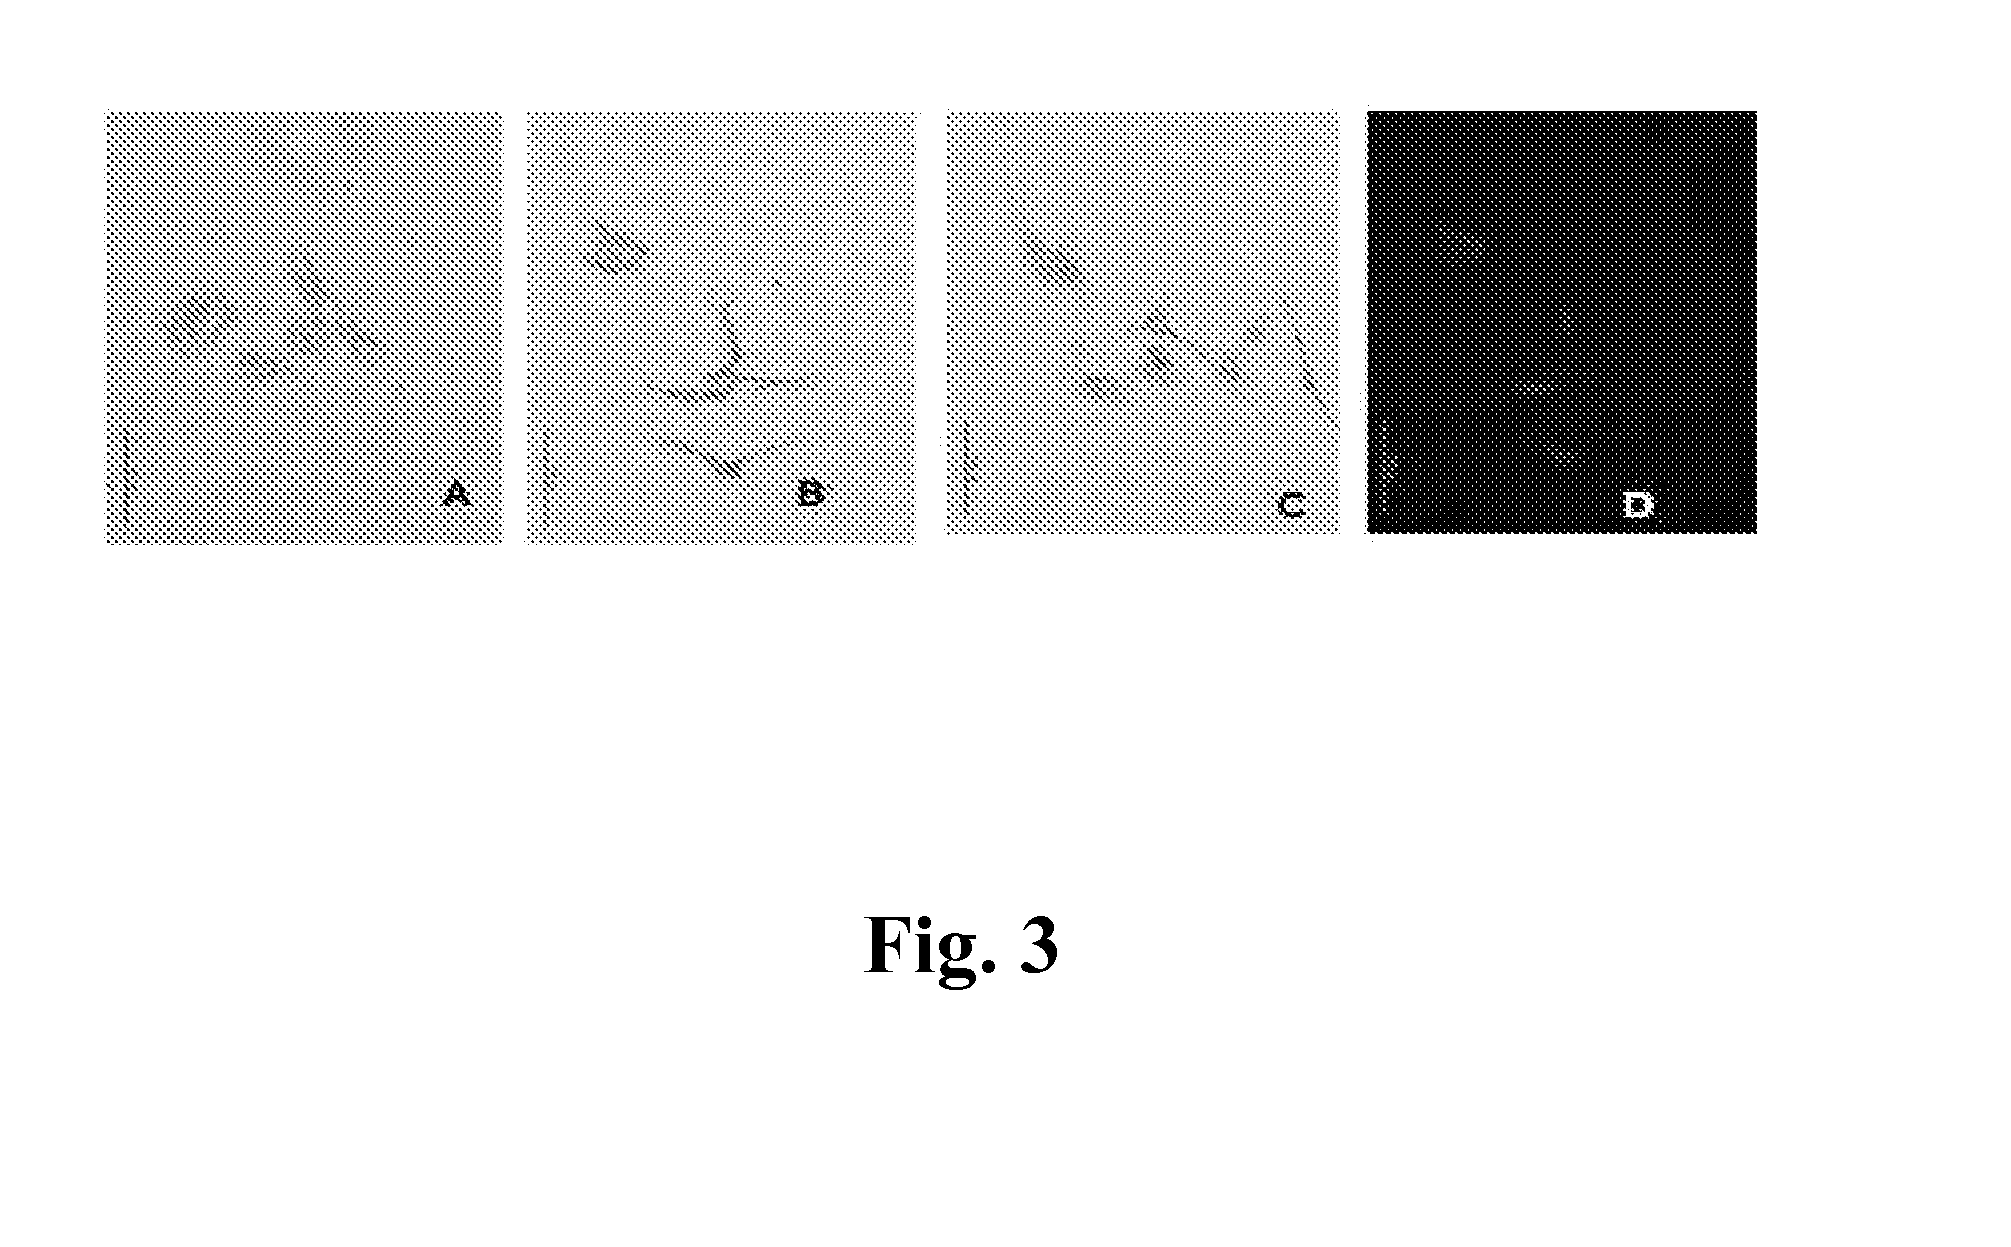 Method for peptide histochemical diagnosis